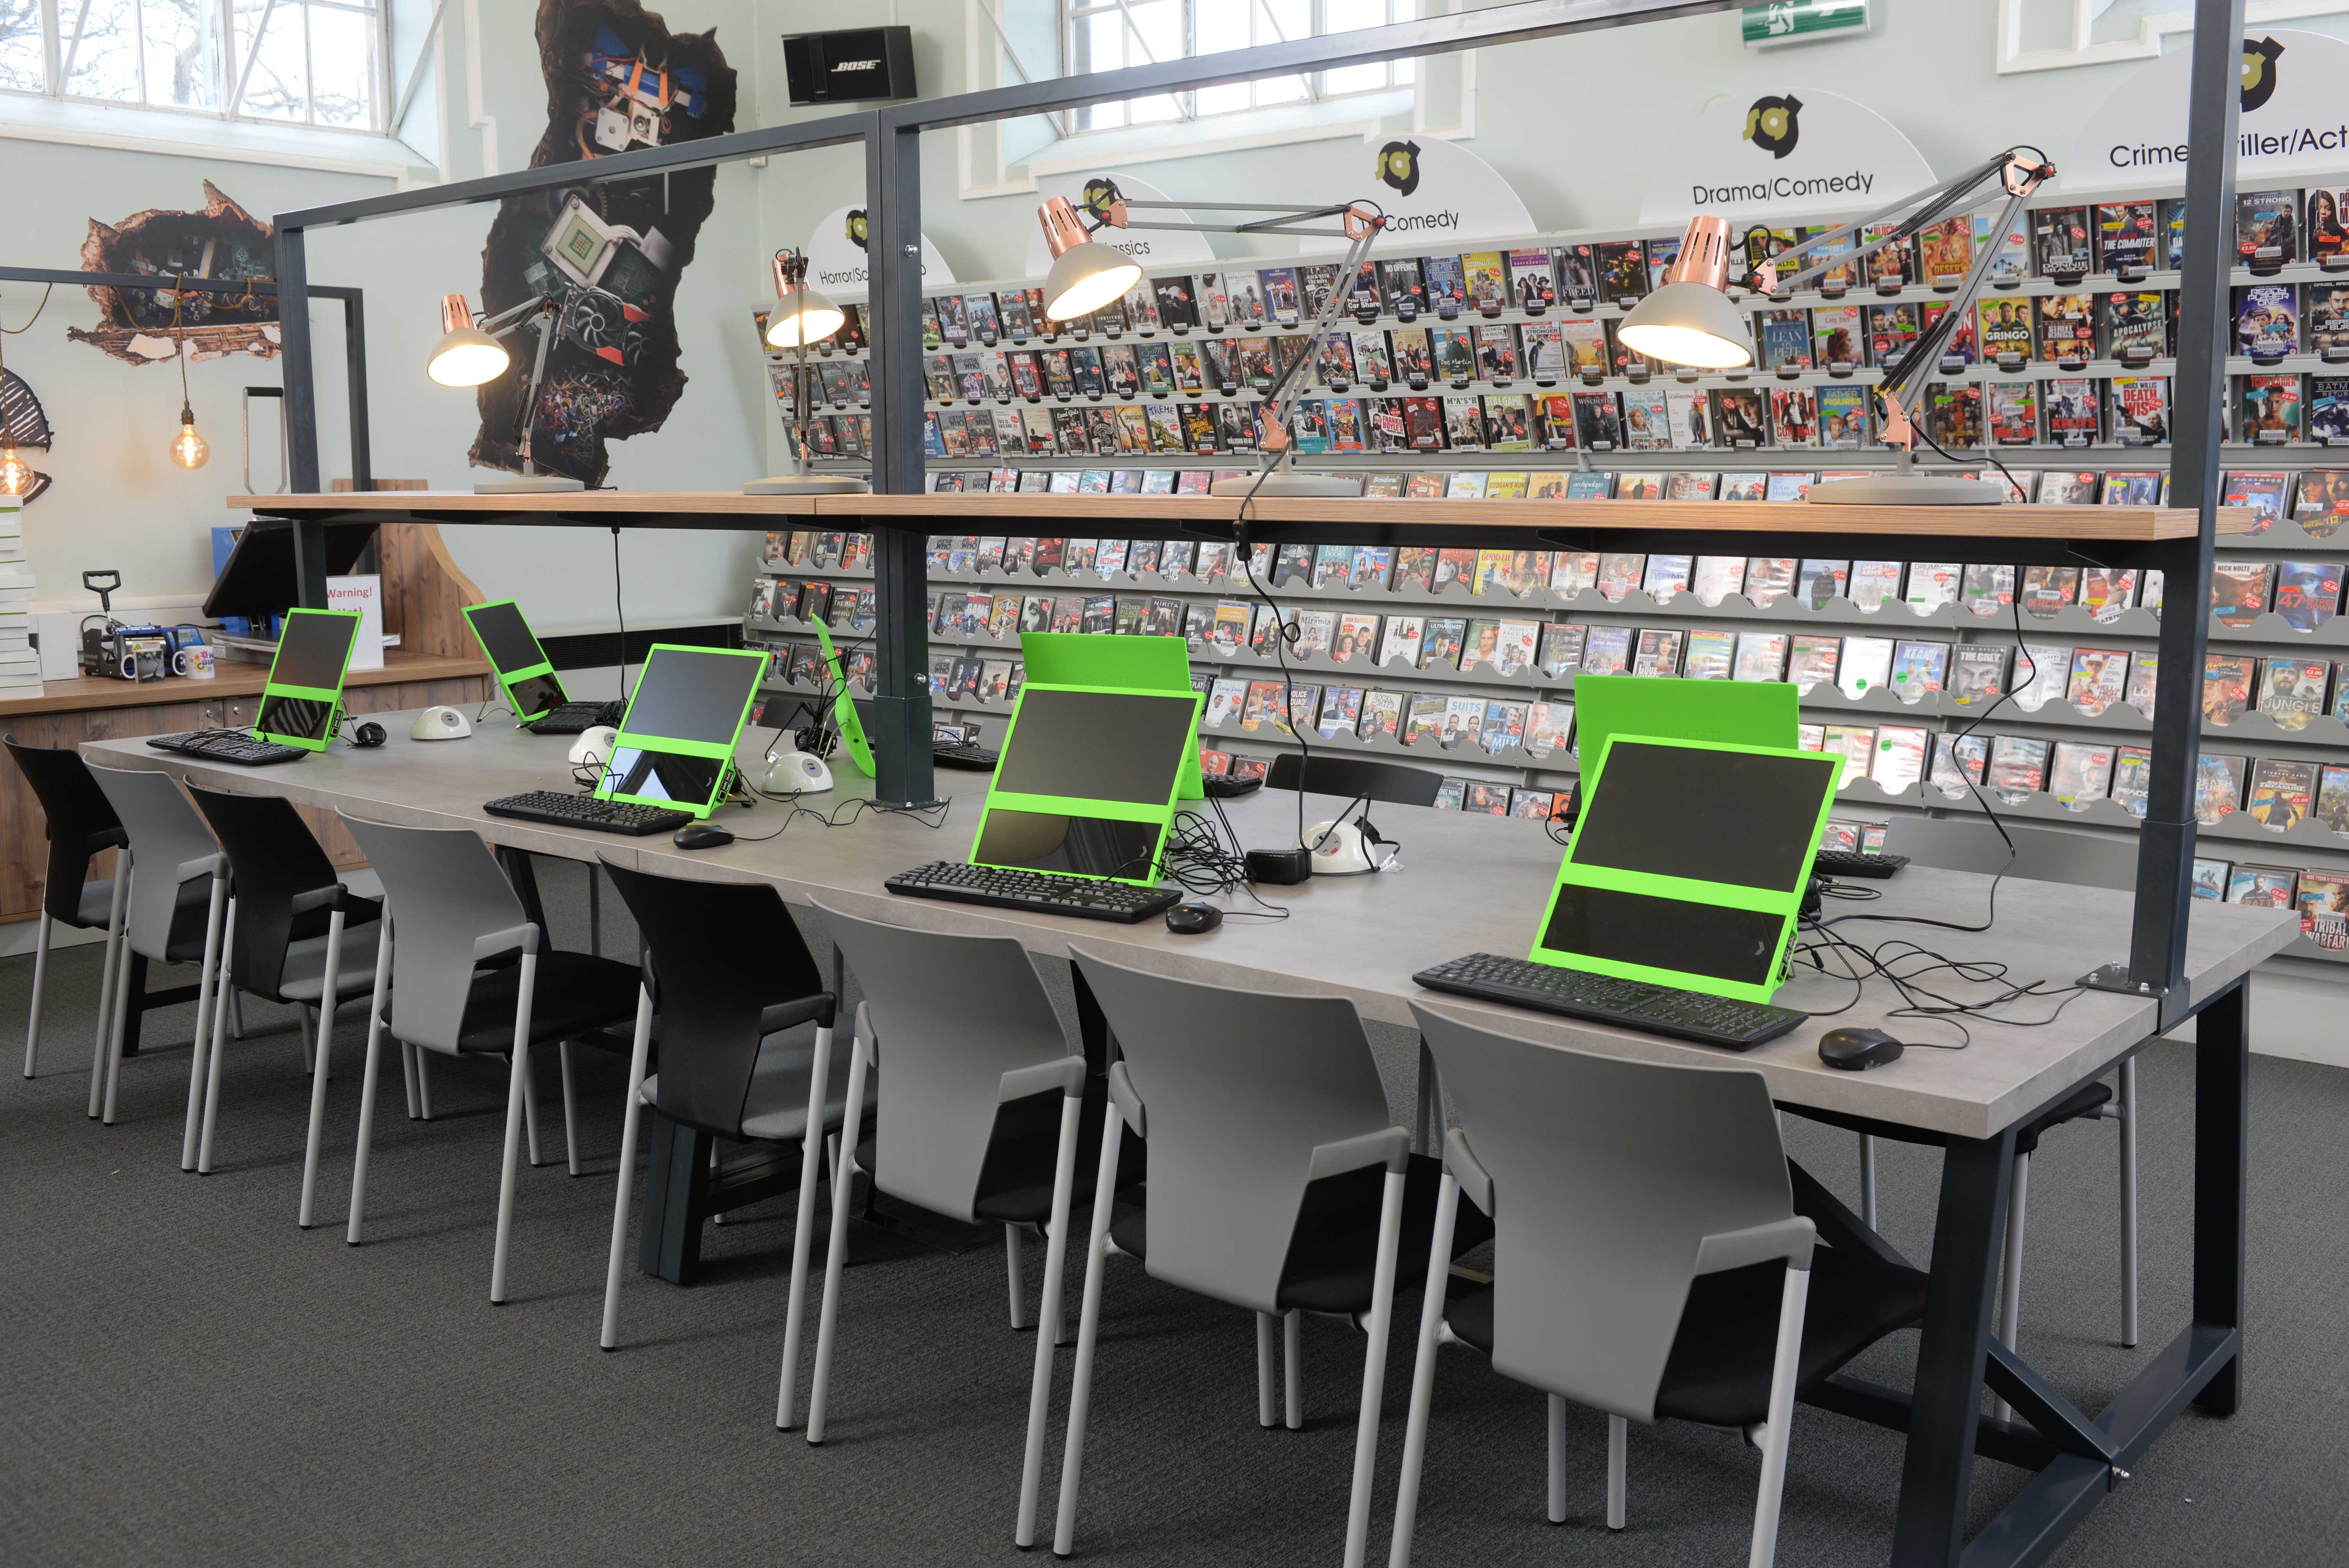 The MakerPlace shares space with the Sound and Vision library